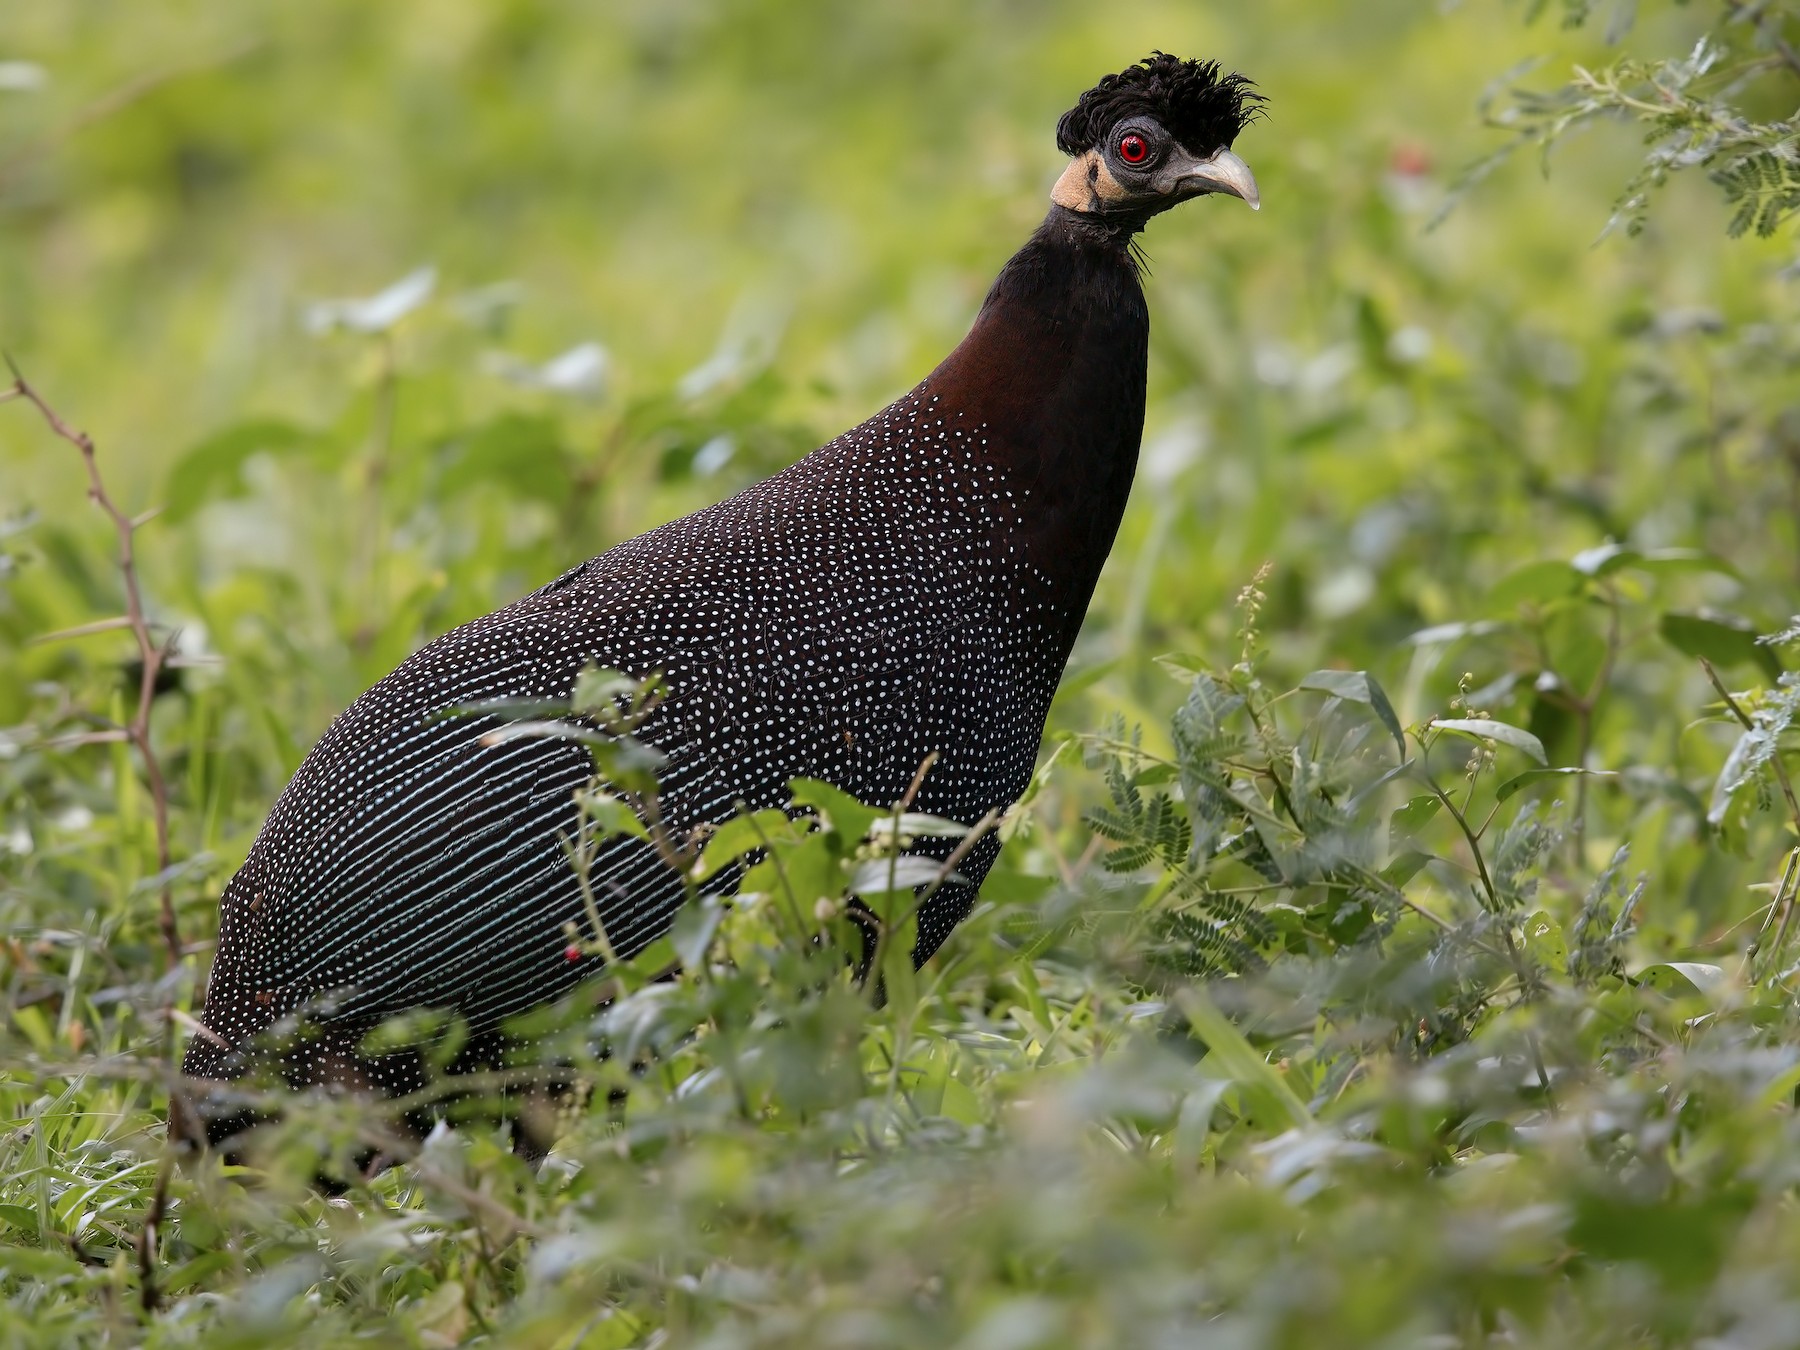 crested guineafowl sp. - Marco Valentini